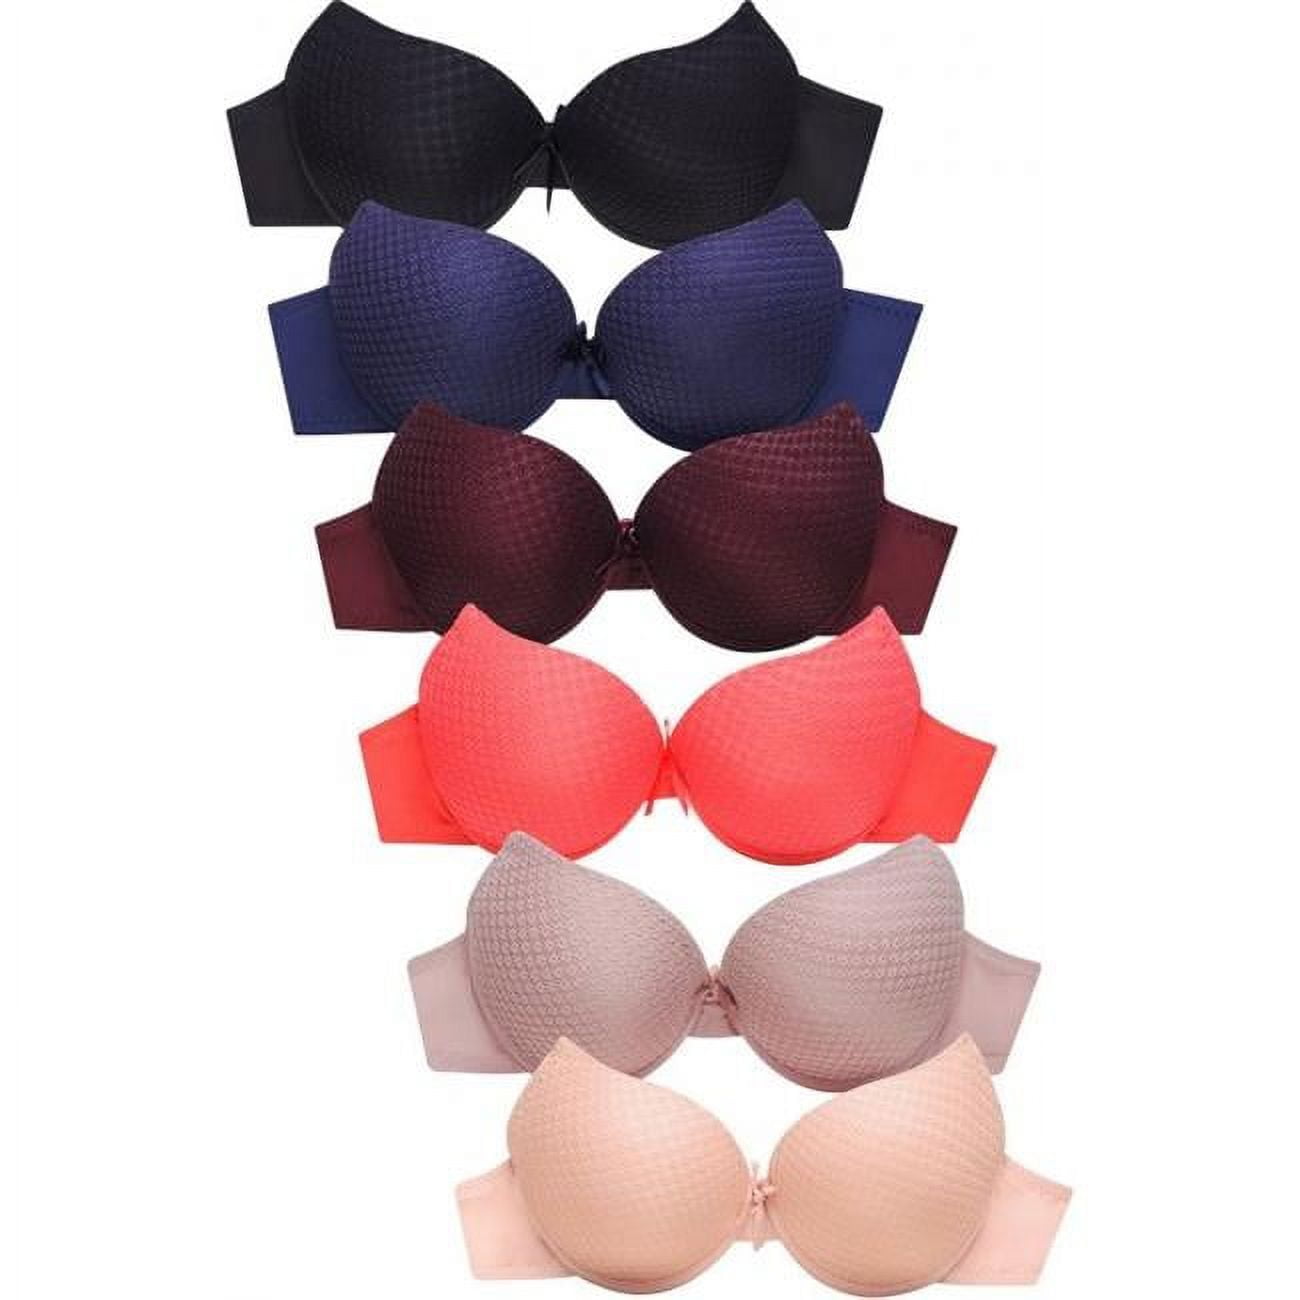 Sofra BR4324LPU - 36C Womens Demi Coverage Lace Push Up Bra - Assorted  Color - 36C - Pack of 6 